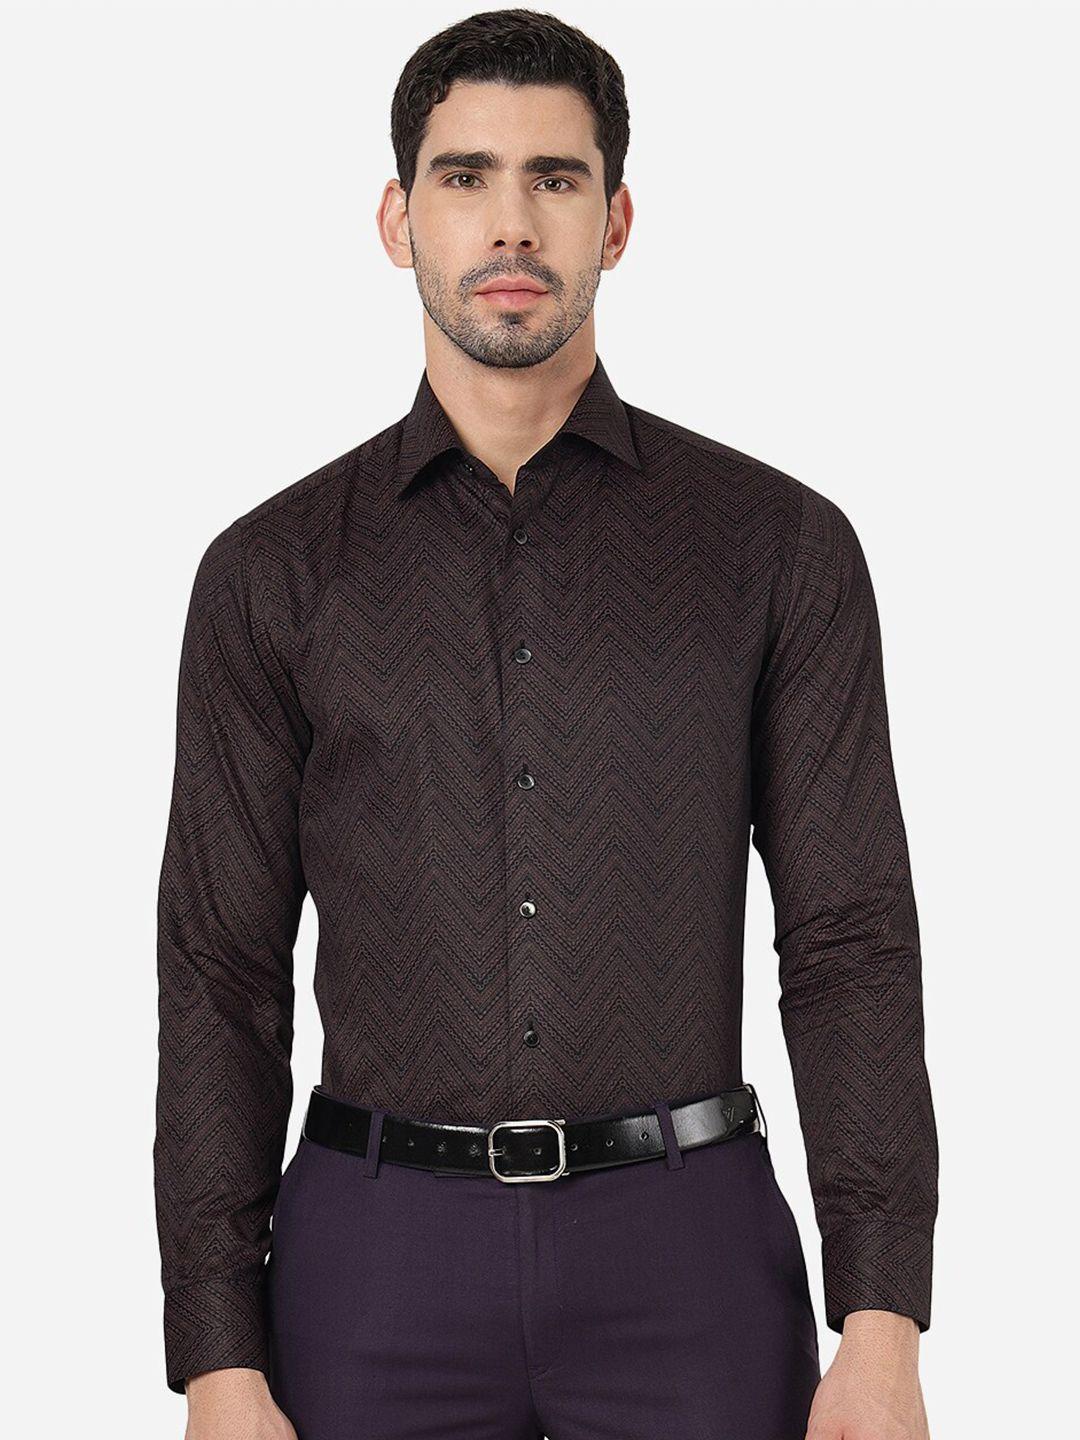 wyre-slim-fit-geometric-printed-pure-cotton-party-shirt